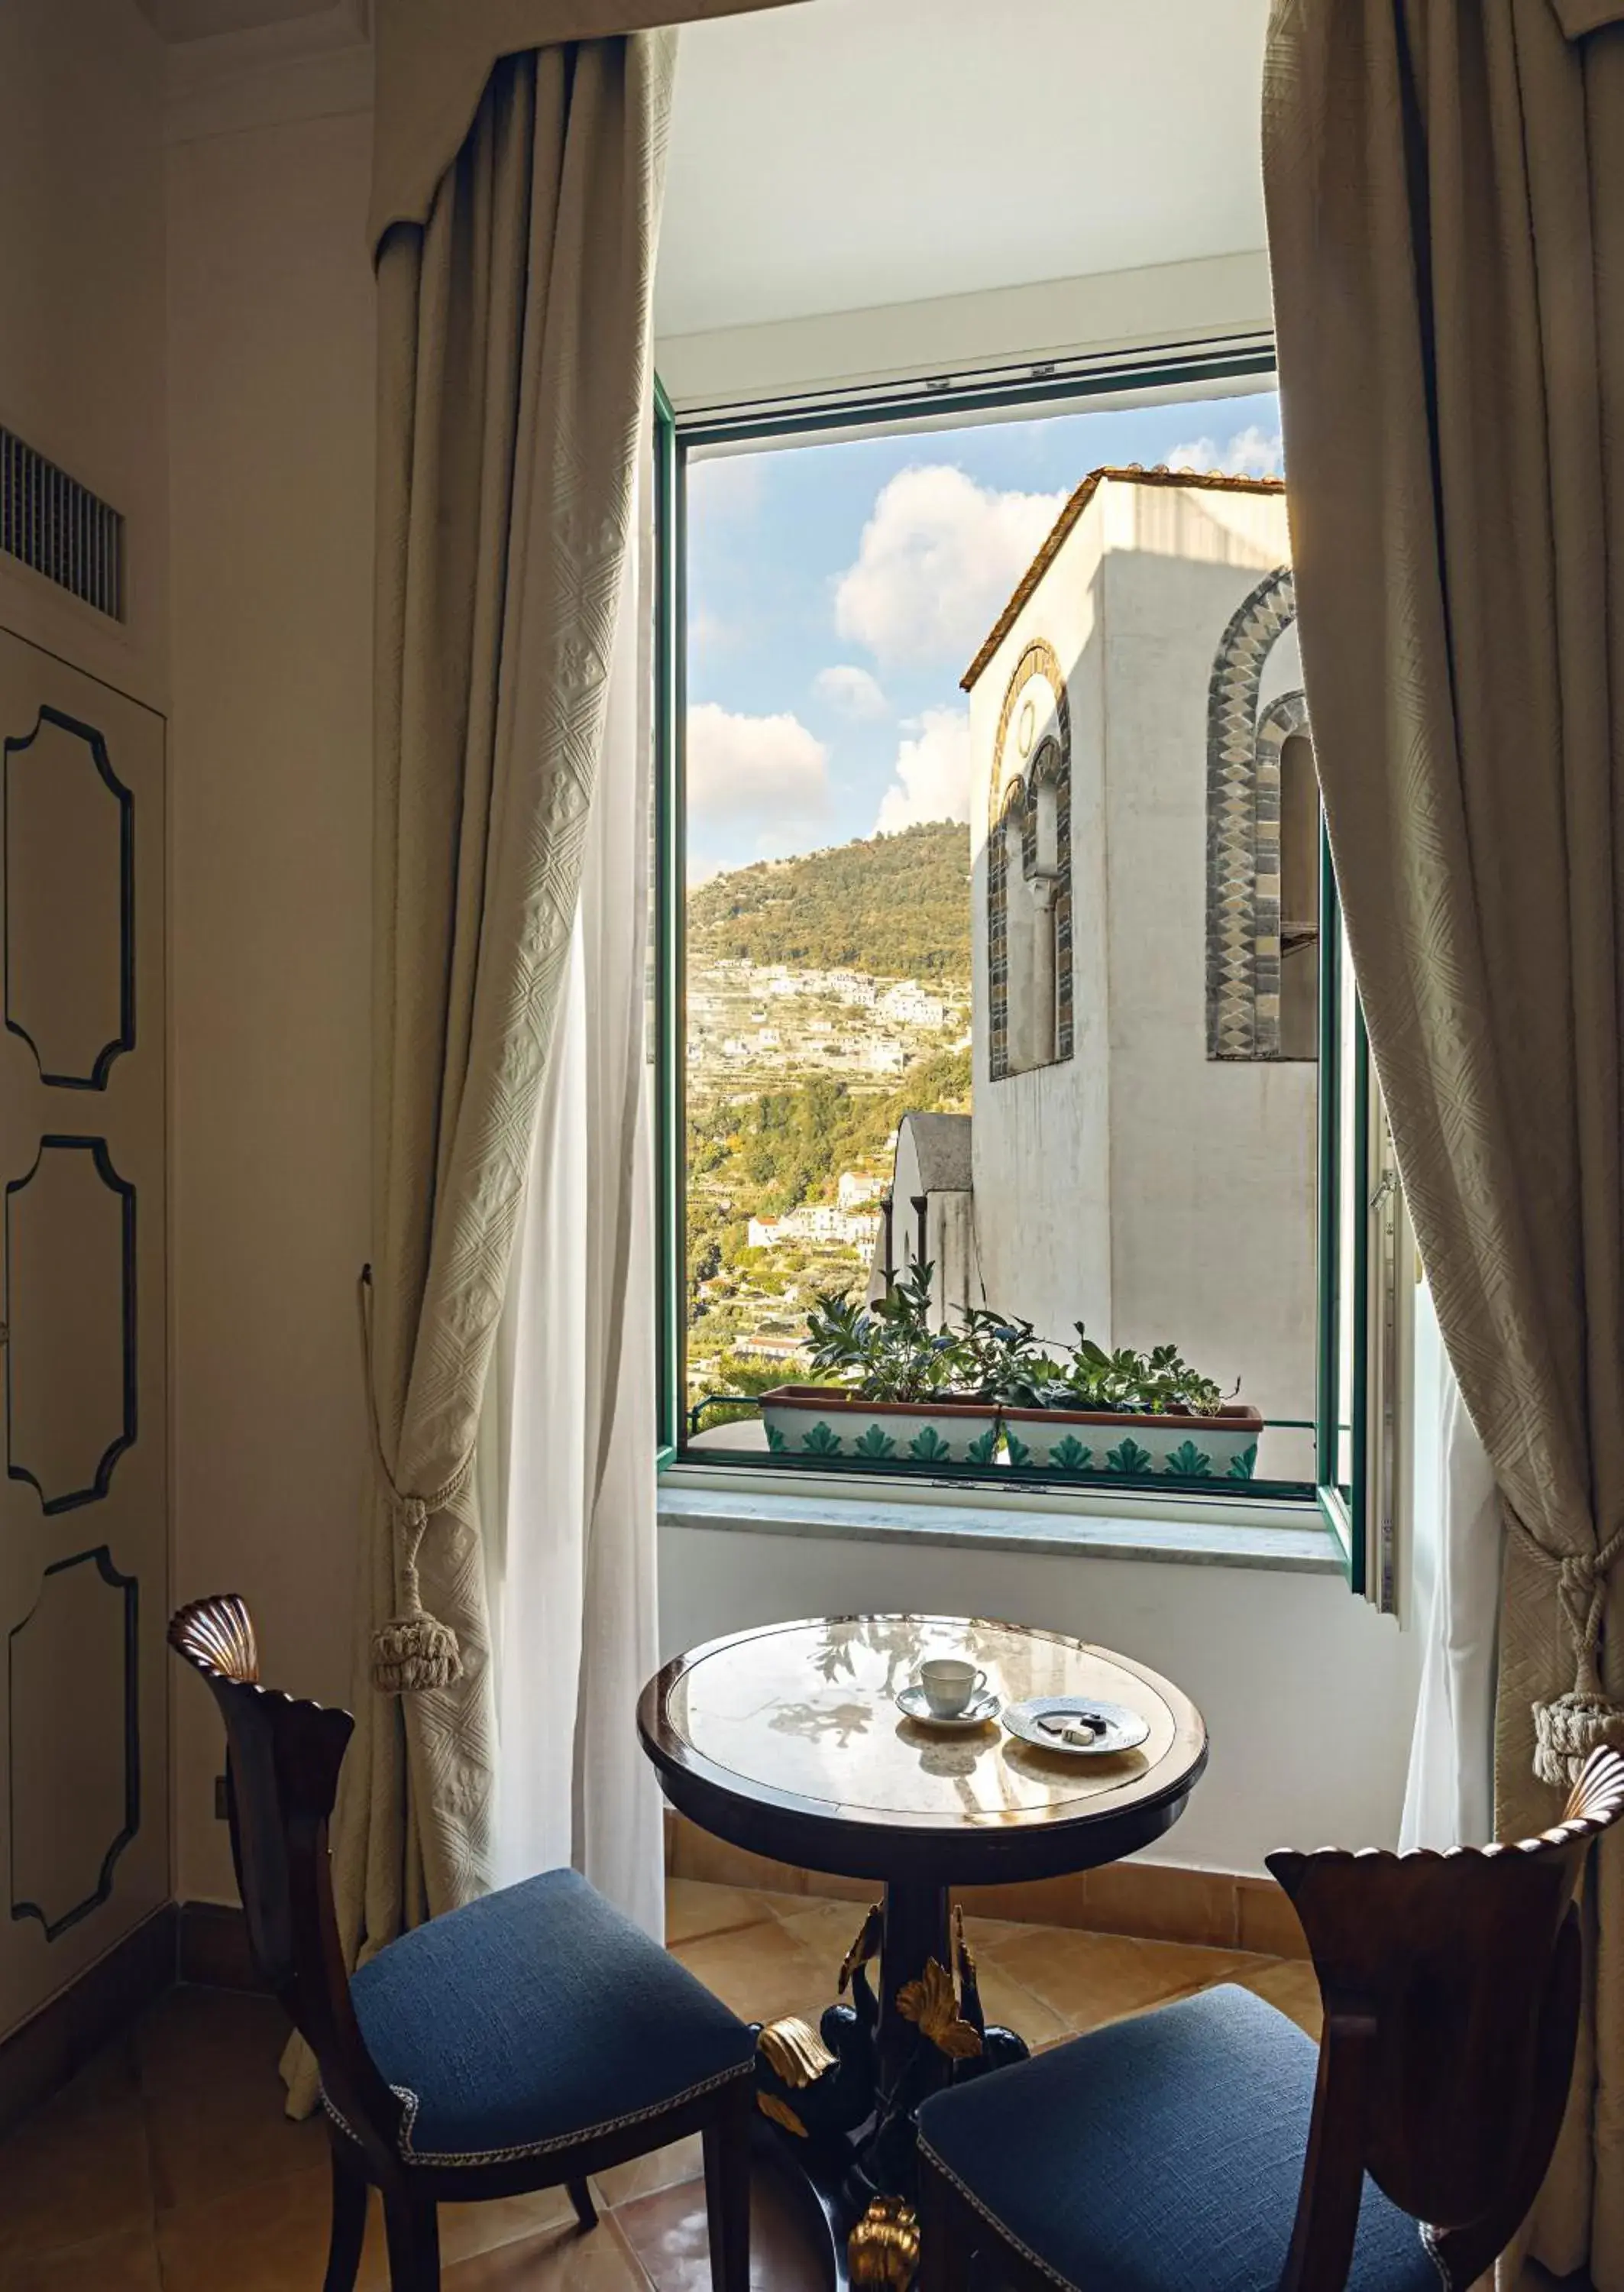 View (from property/room), Mountain View in Caruso, A Belmond Hotel, Amalfi Coast